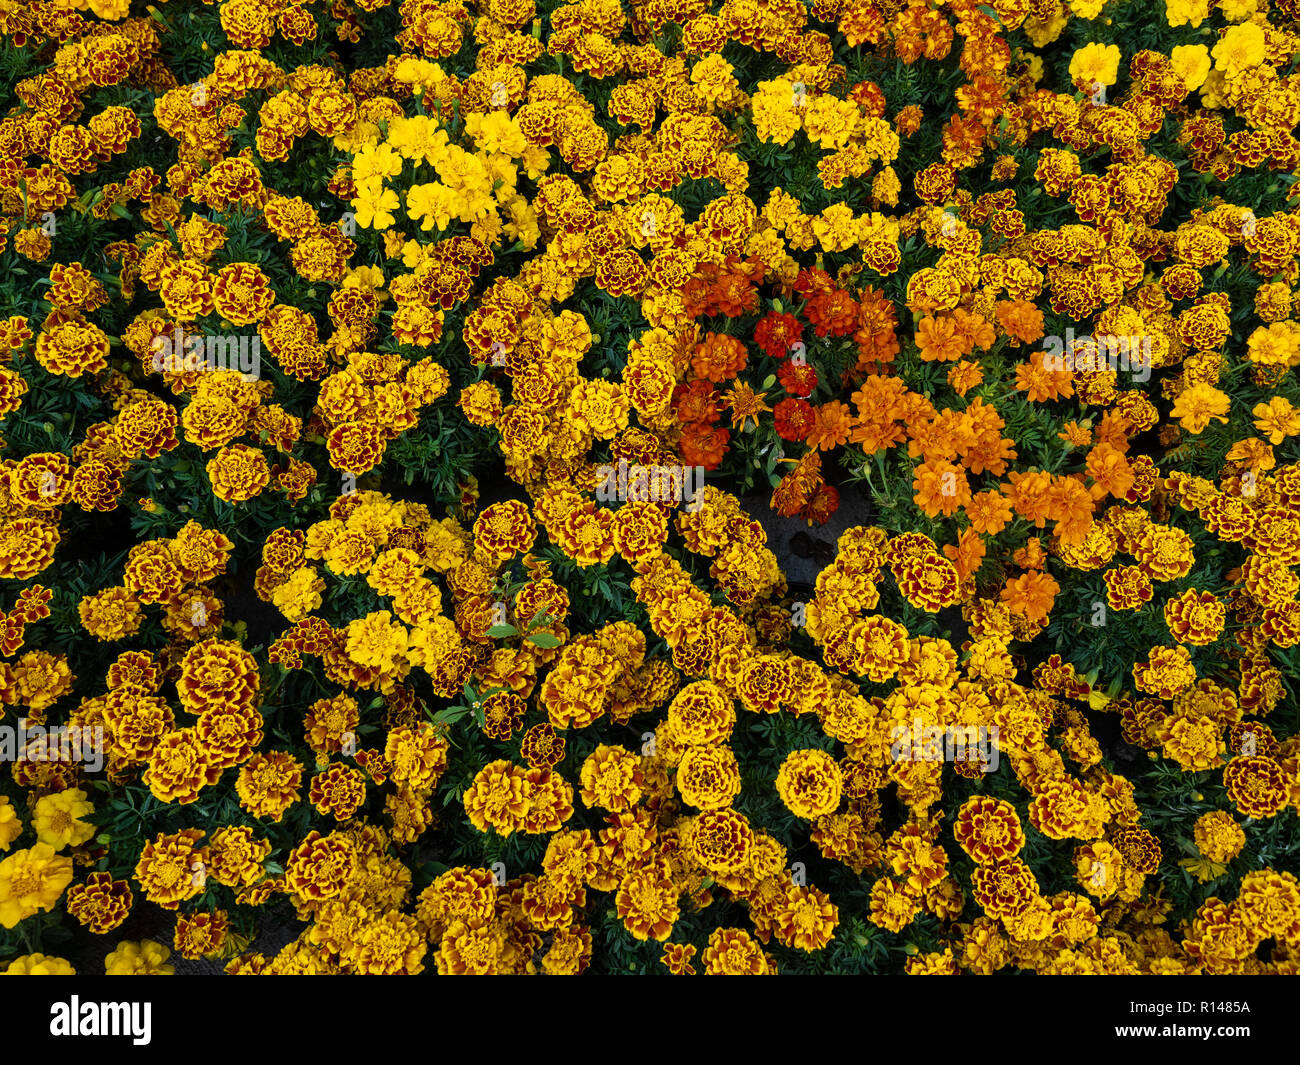 Bright Yellow Marigolds (Tagetes Erecta) for the Day of the Dead Celebration in Colonia San Angel in Mexico City (CDMX) Stock Photo